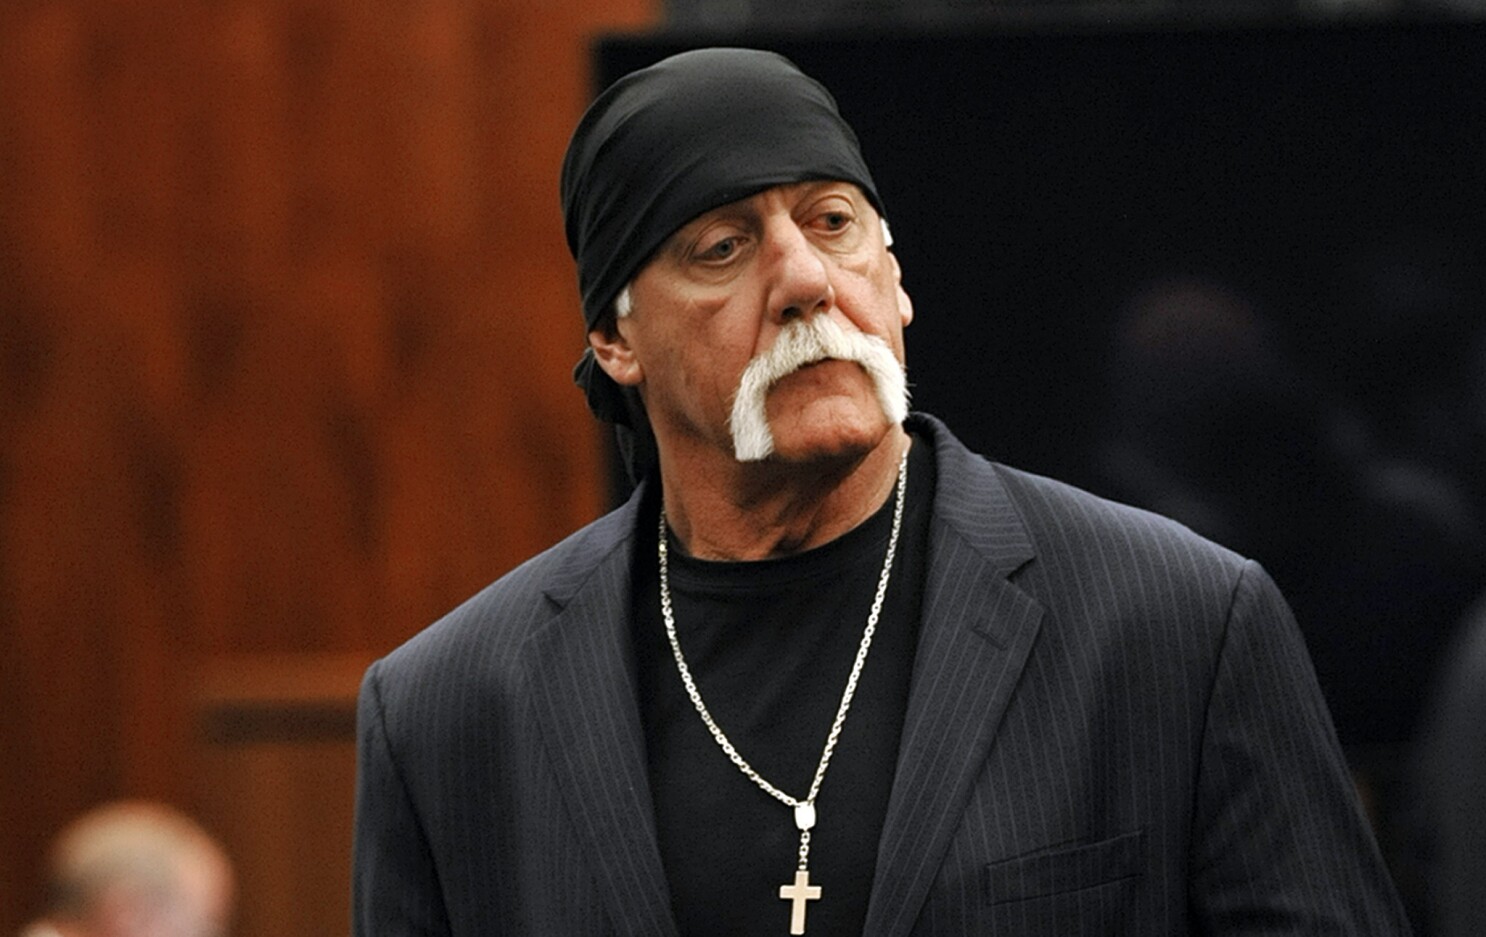 Hulk Hogan seeks rematch with Gawker, sues over transcript with quotes - Los Angeles Times